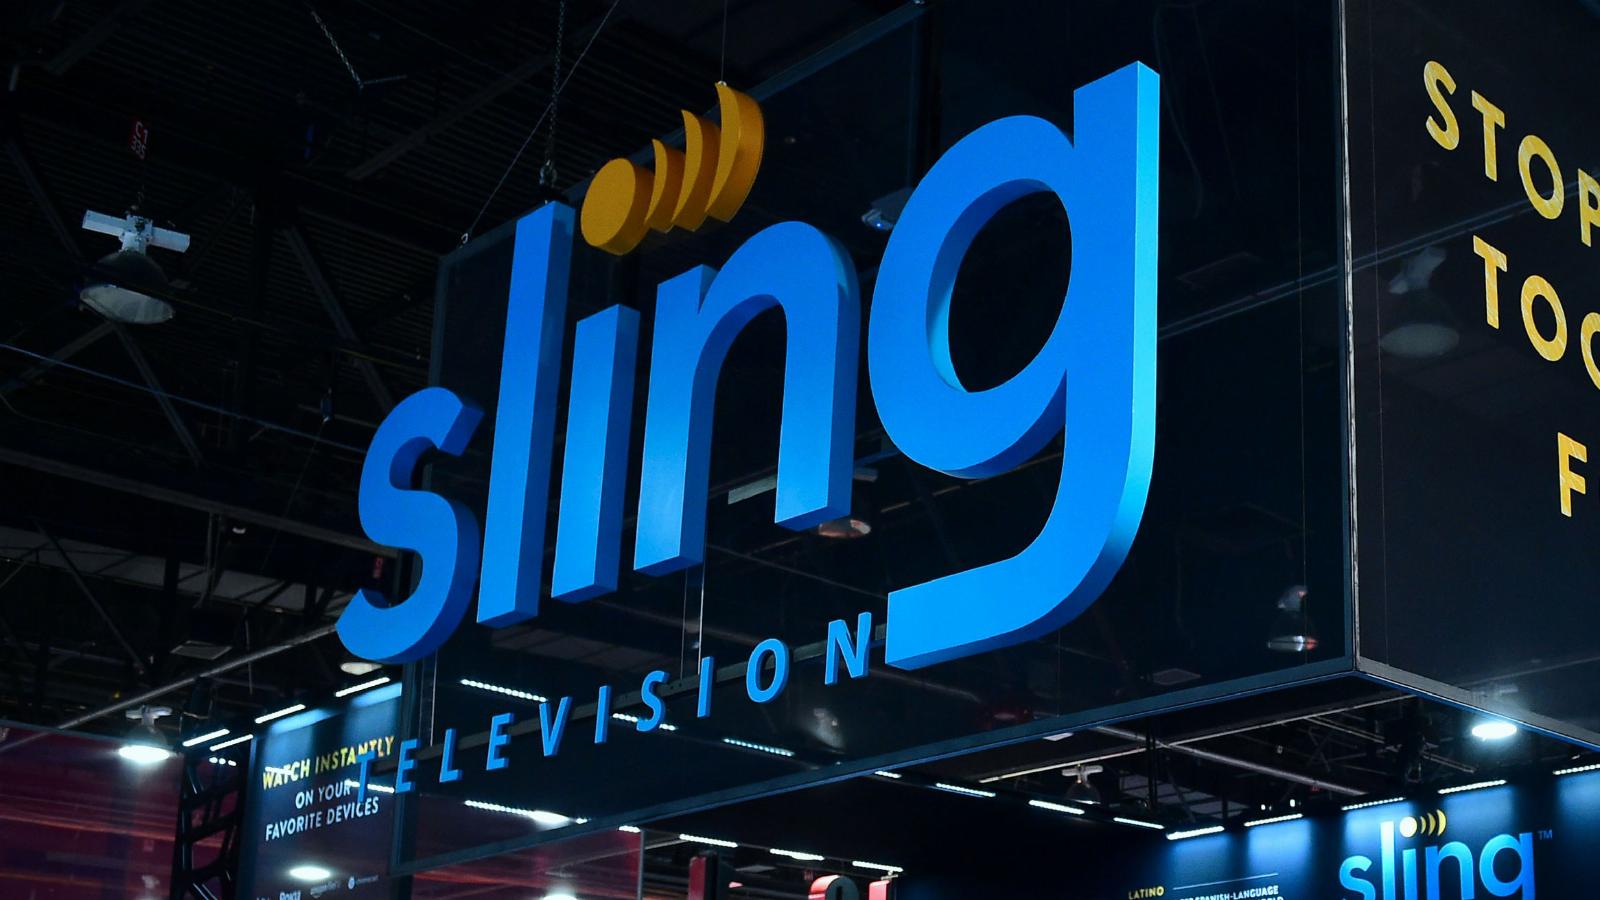 Sling TV now lets customers play free arcade games while watching live TV content